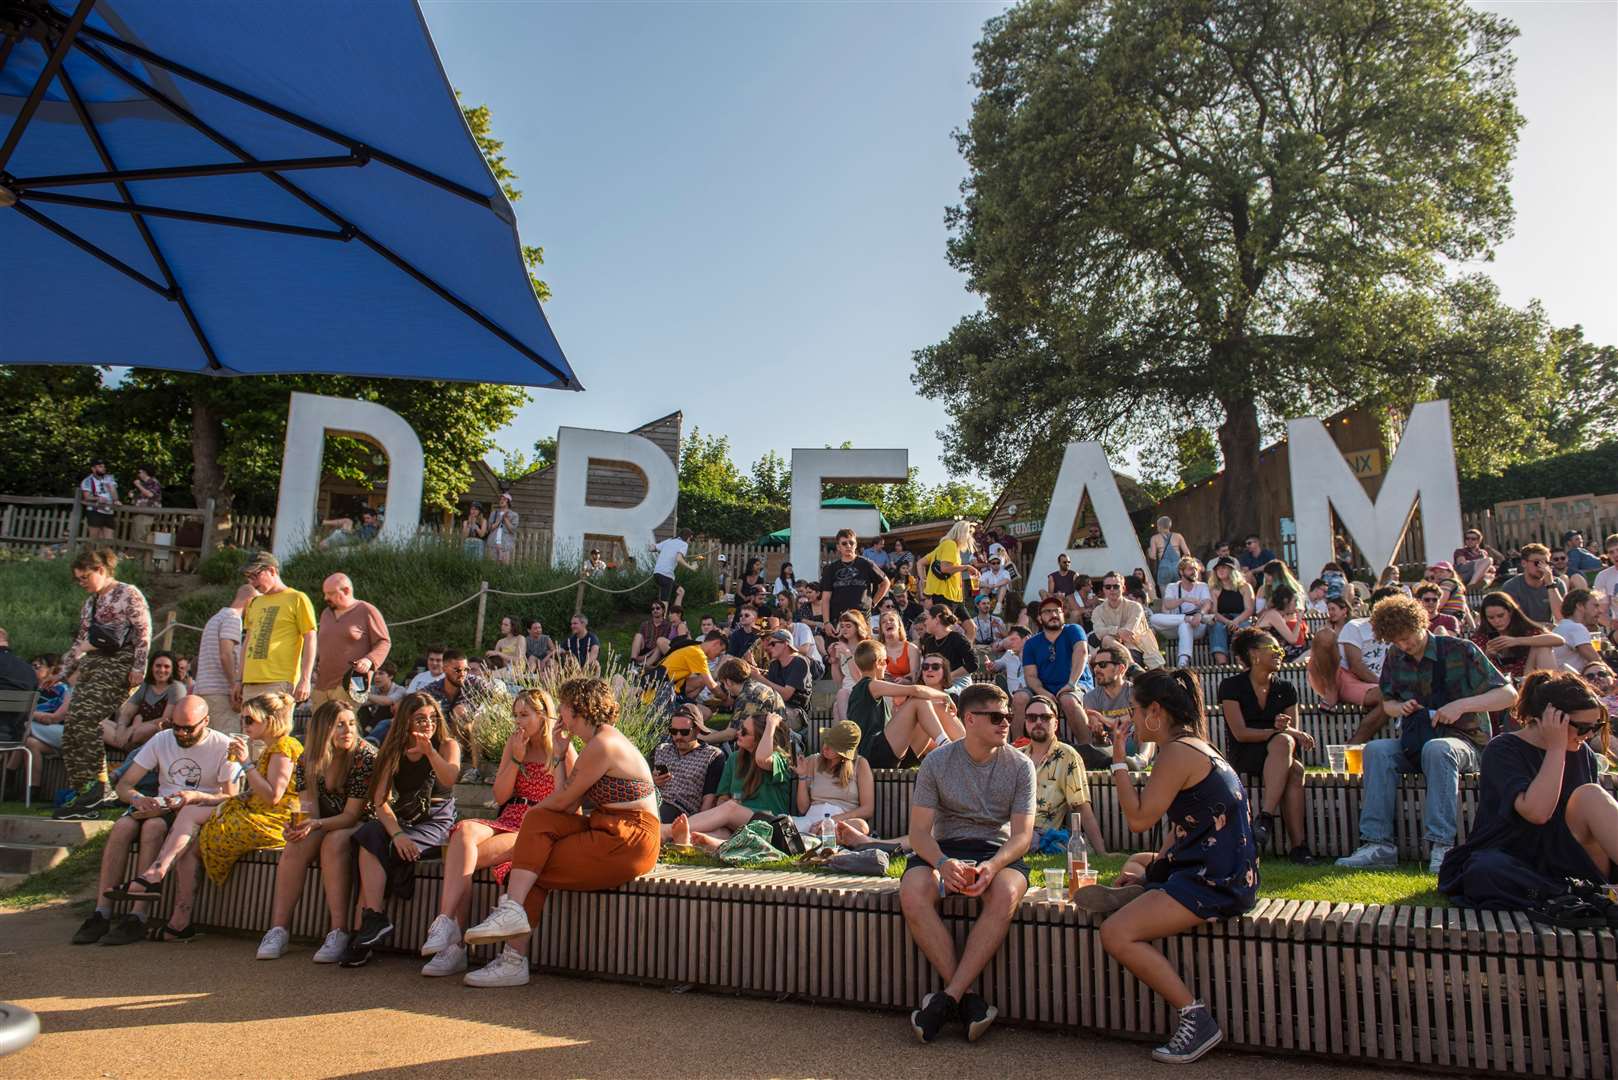 Dreamland had announced many events this year to celebrate its 100 year anniversary. Picture: Dreamland